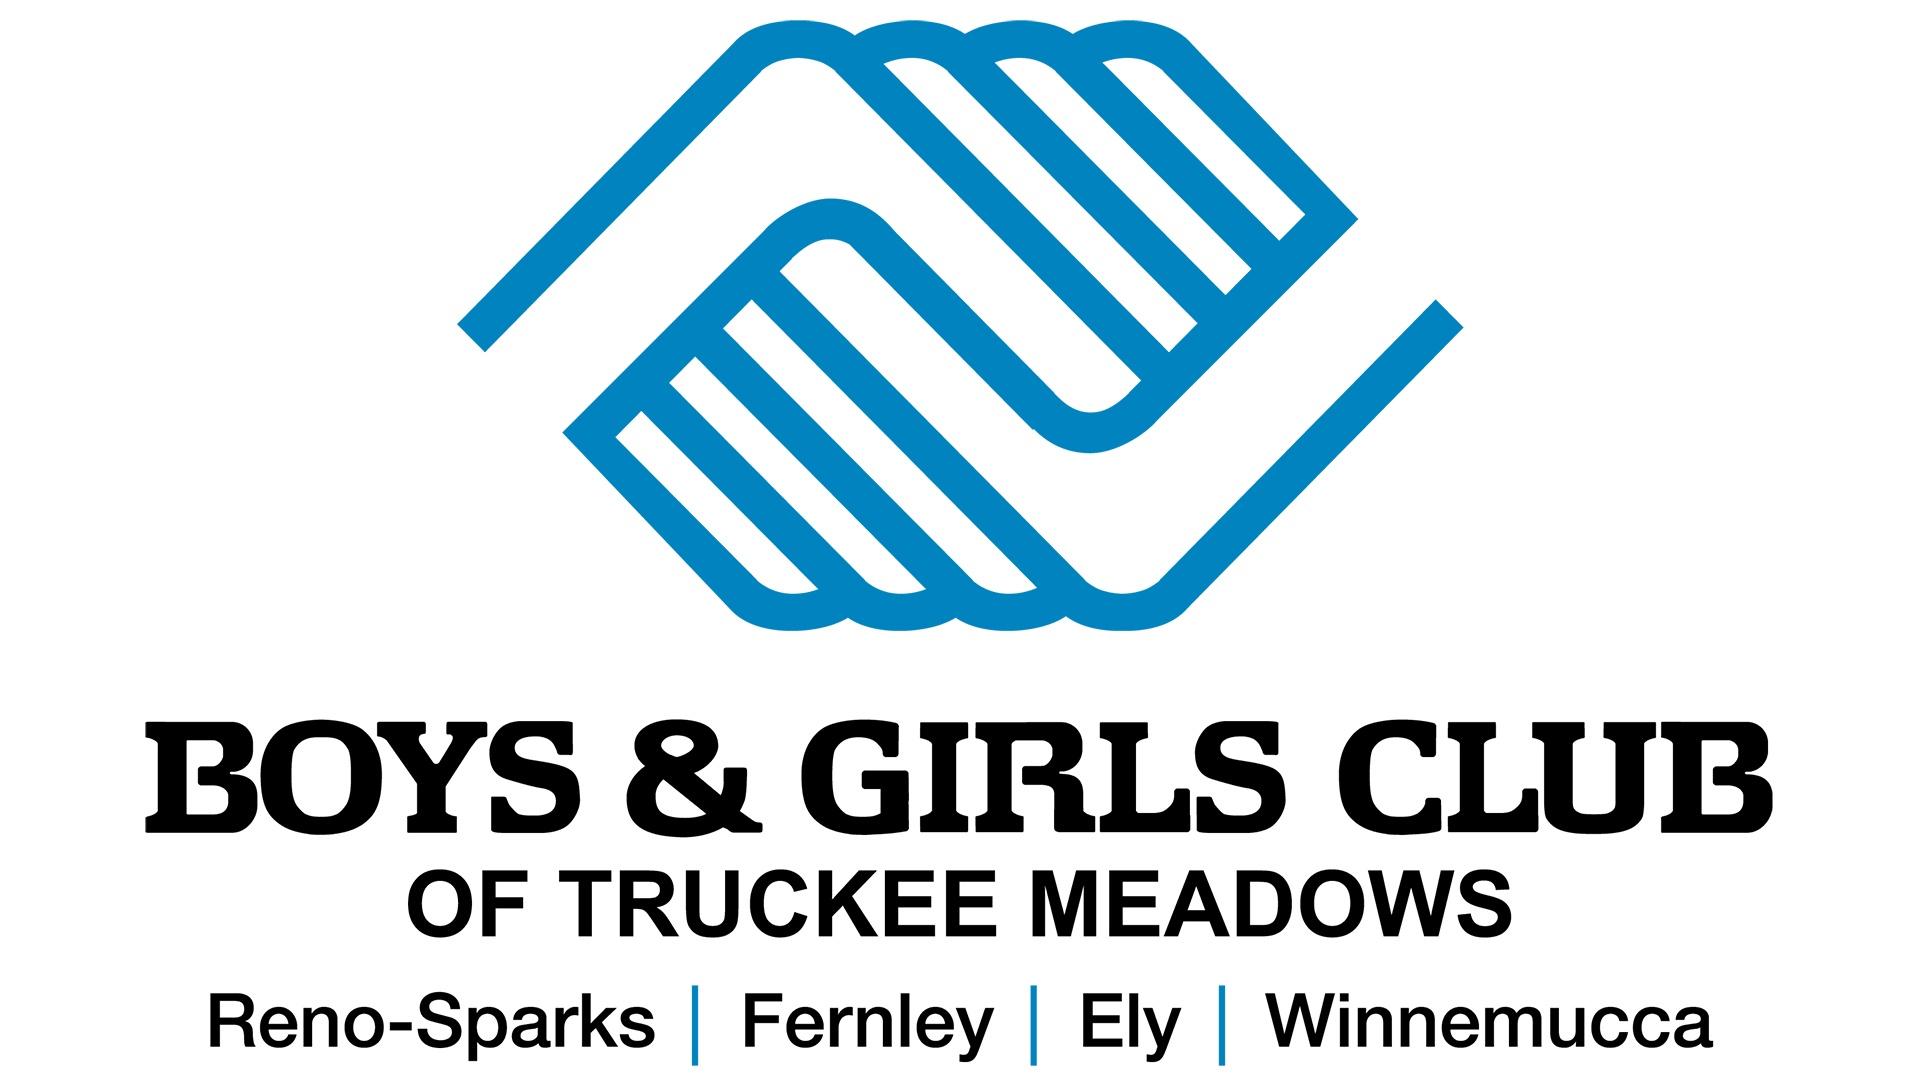 THE BOYS AND GIRLS CLUB OF TRUCKEE MEADOWS